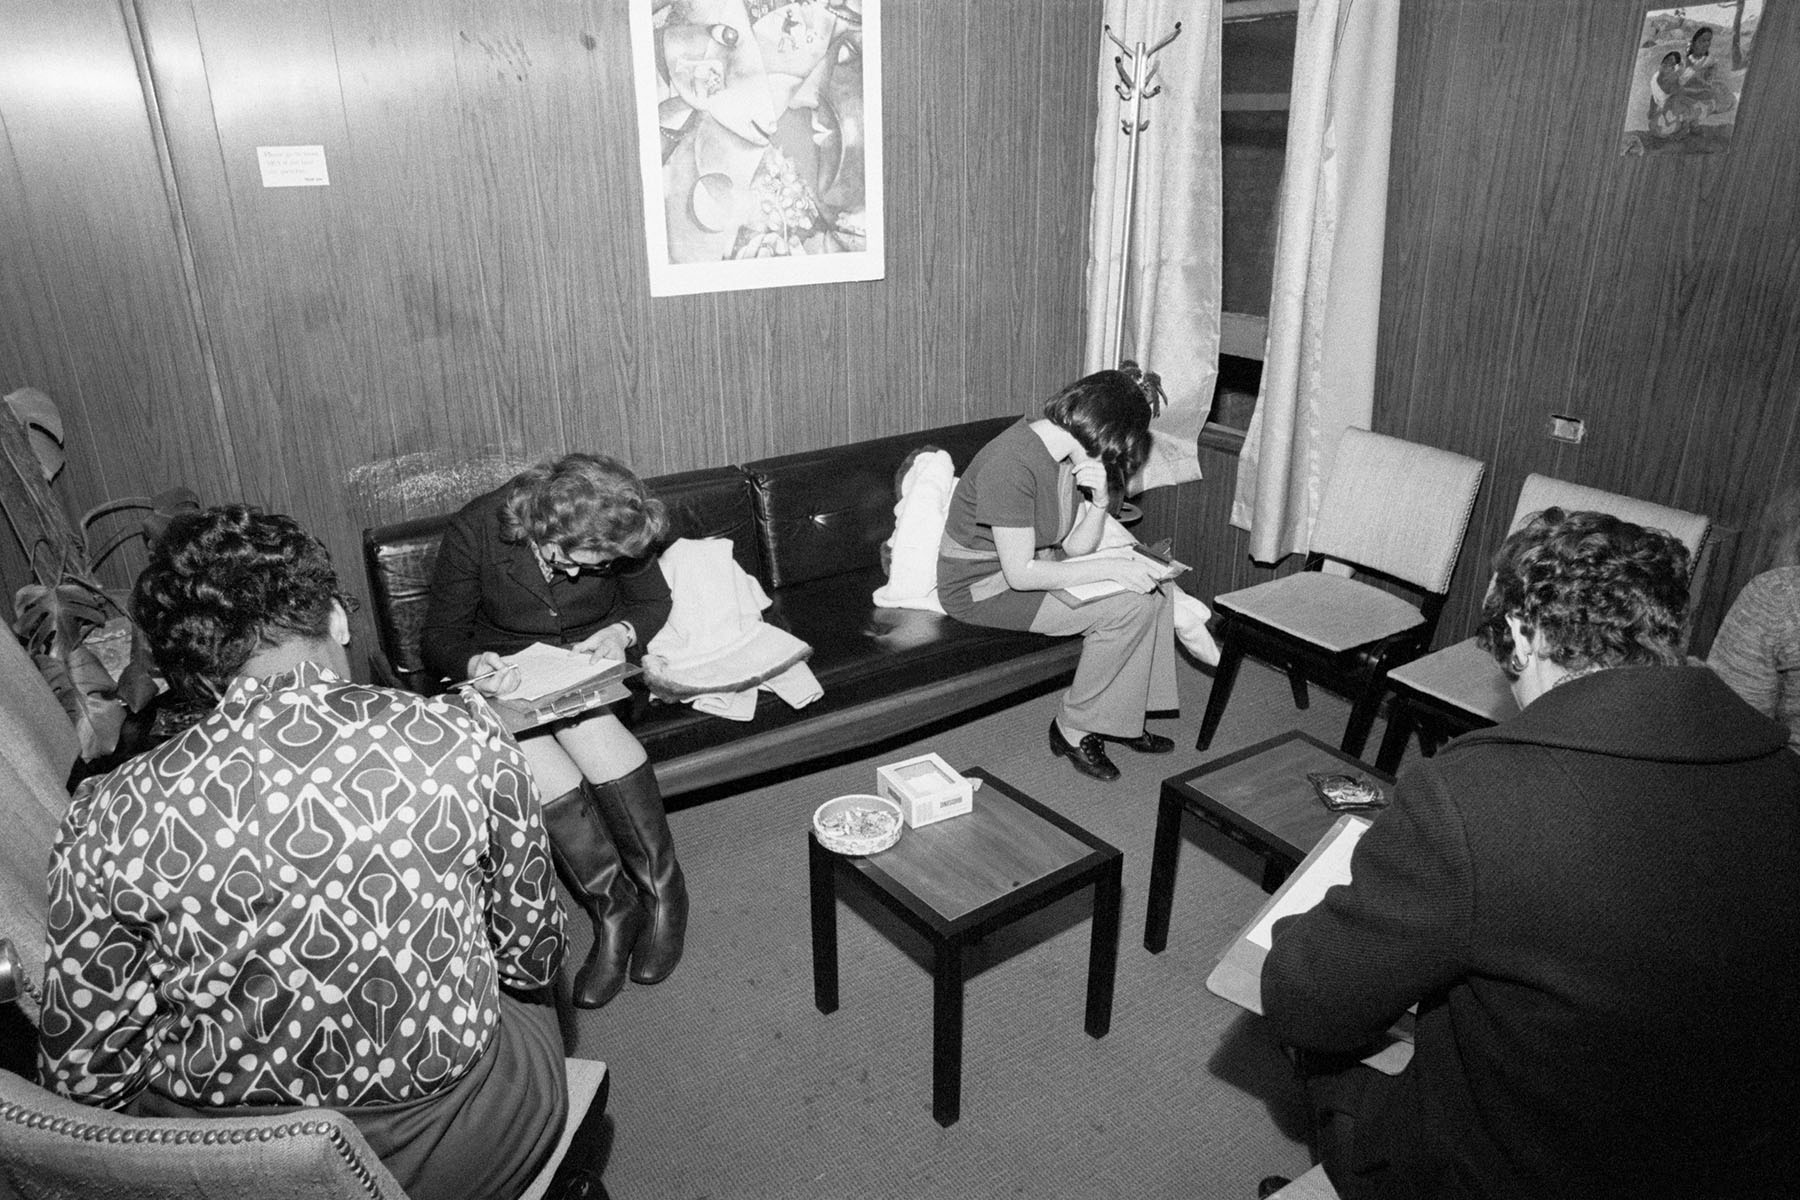 Women fill out forms in the waiting room.